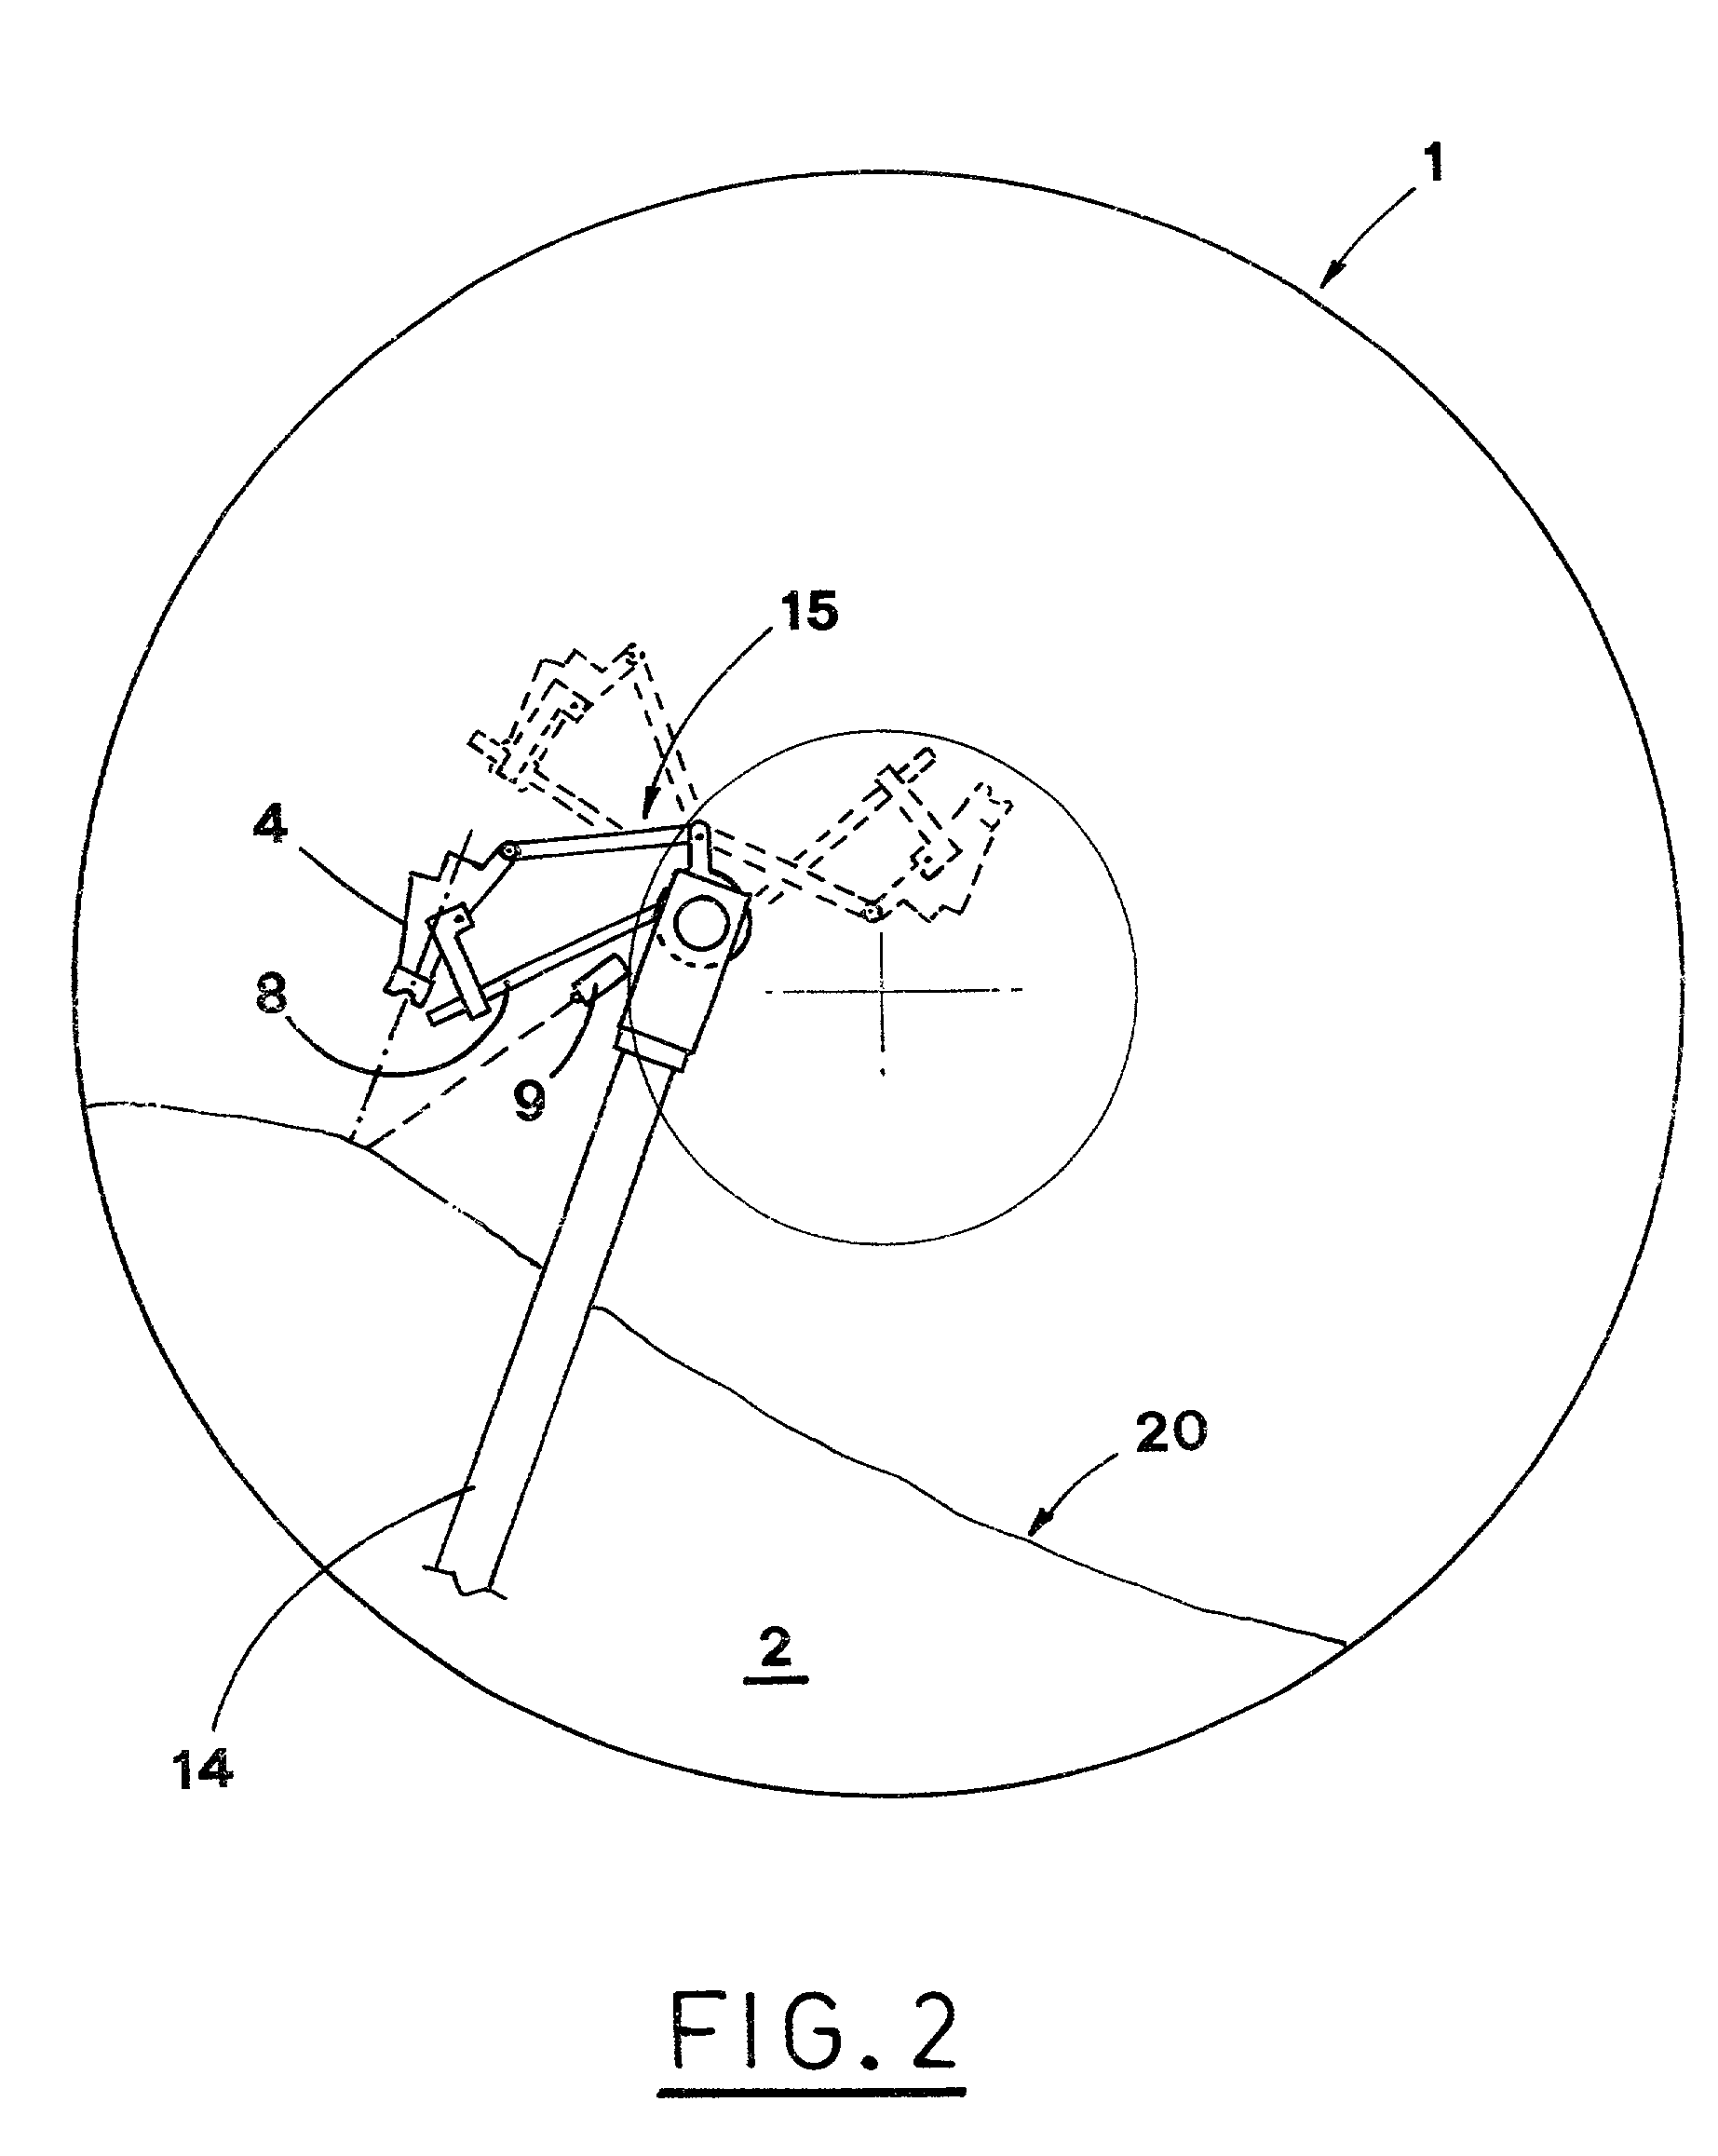 Device for moving and orienting spraying nozzles in a coating pan